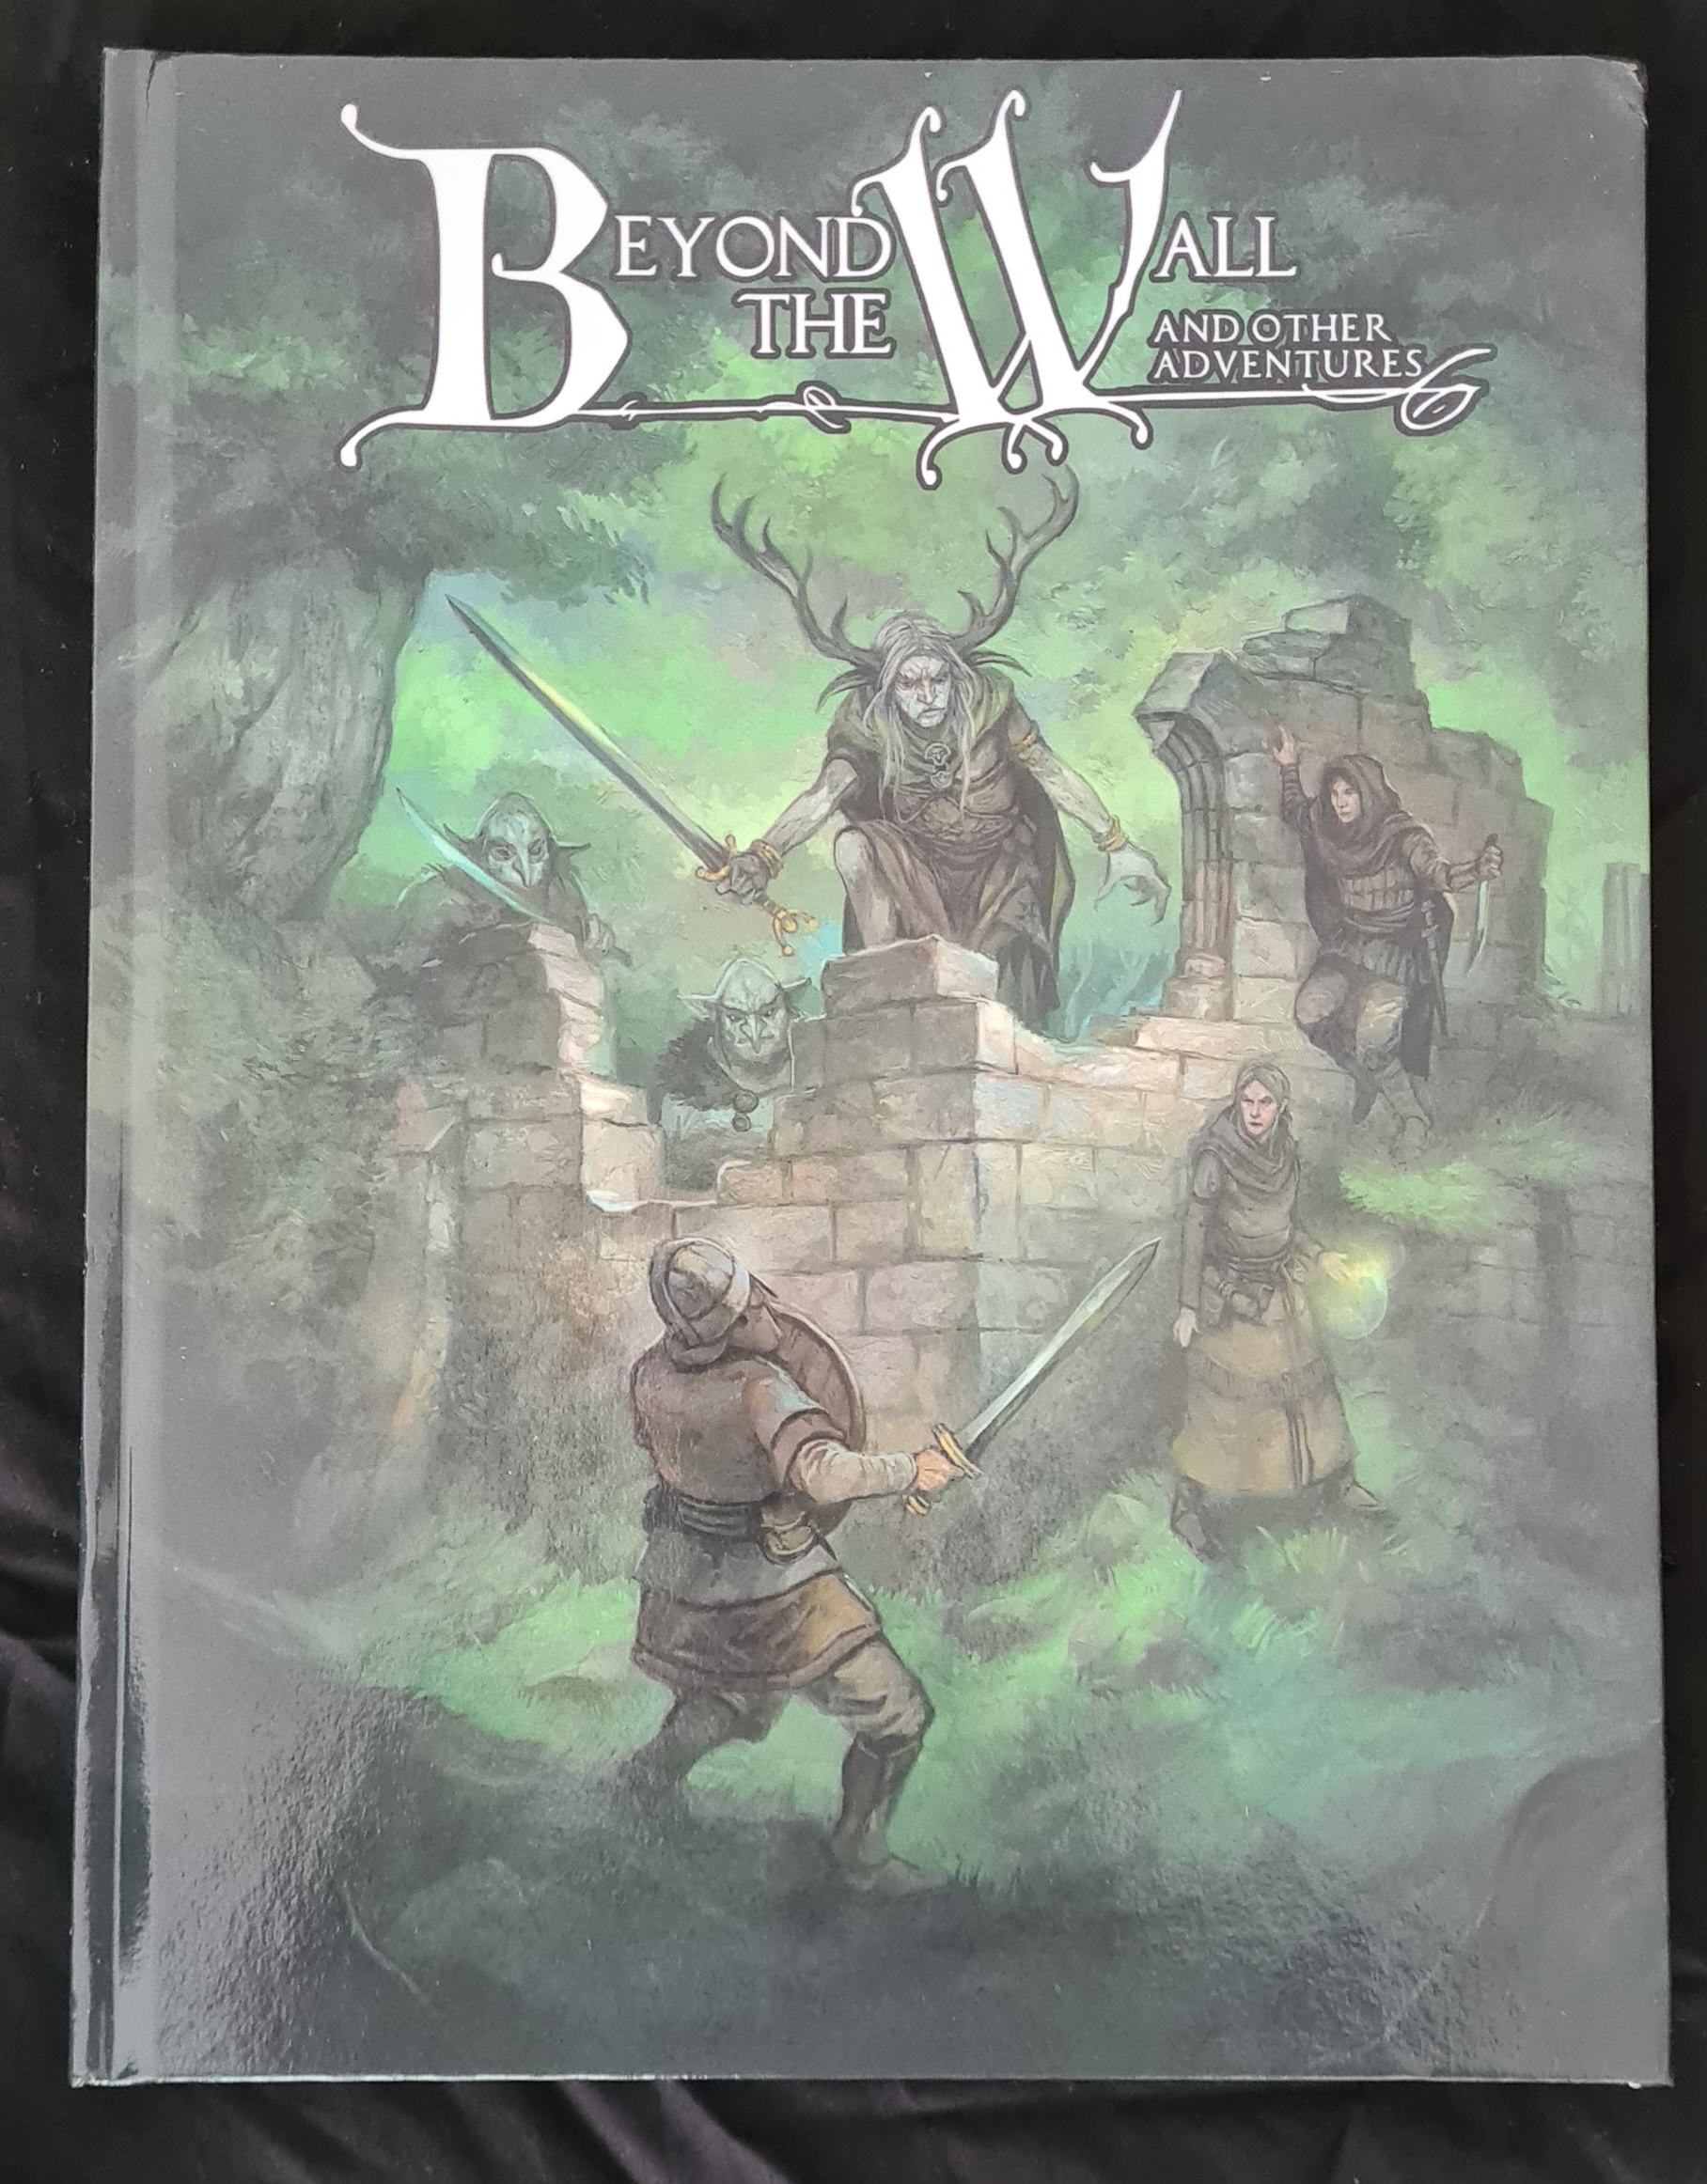 Cover of the Beyond the Wall book. It shows a fight scene in a ruin that's in a forest.